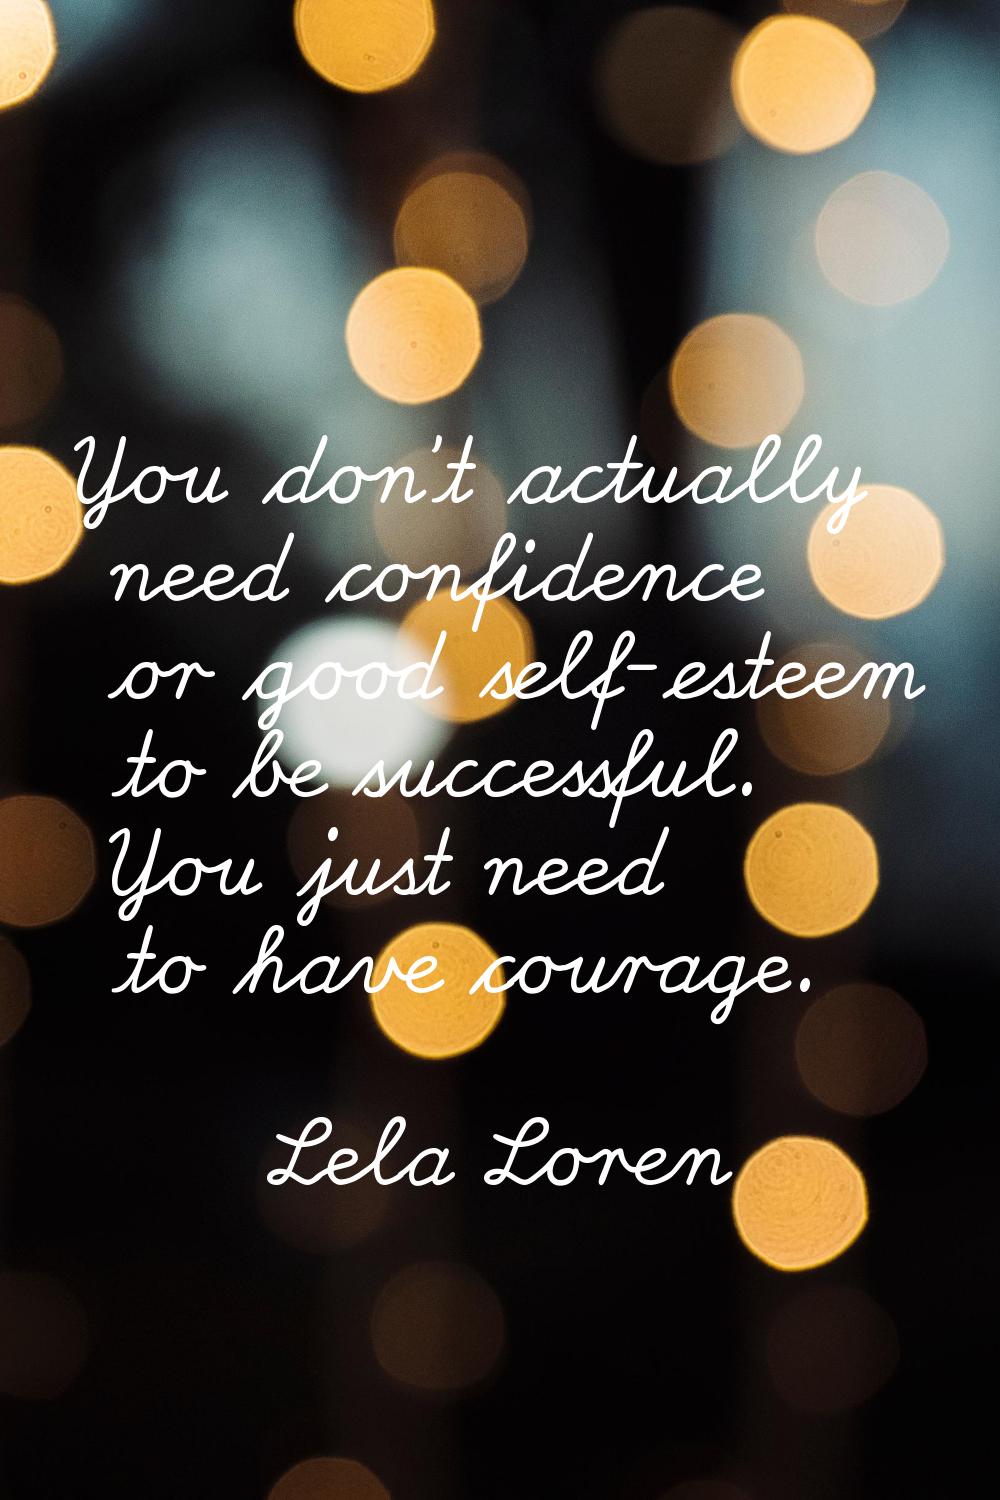 You don't actually need confidence or good self-esteem to be successful. You just need to have cour